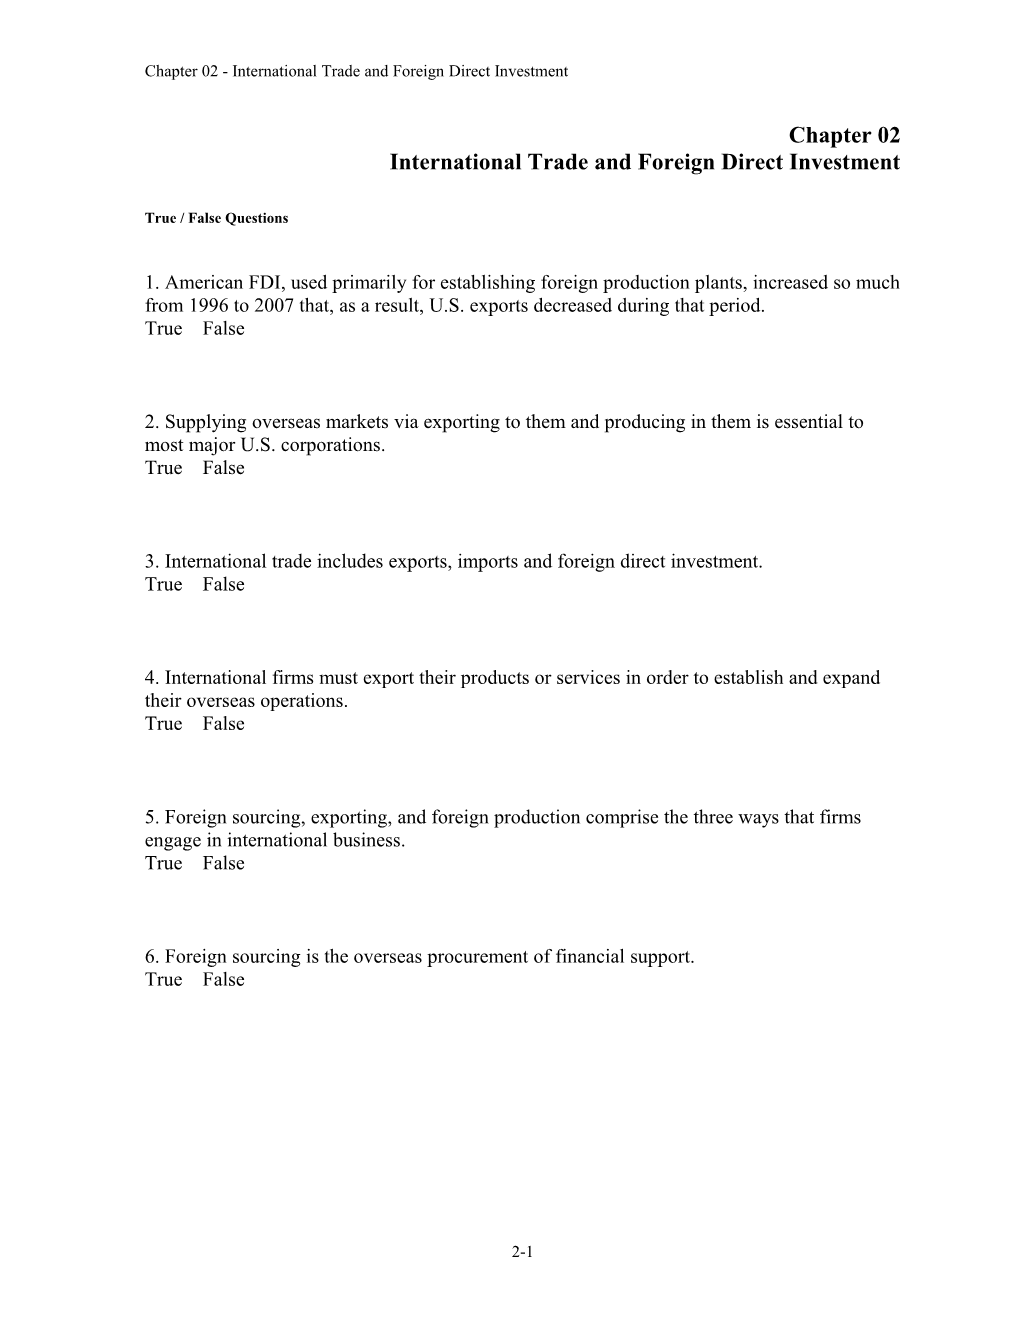 Chapter 02 International Trade and Foreign Direct Investment